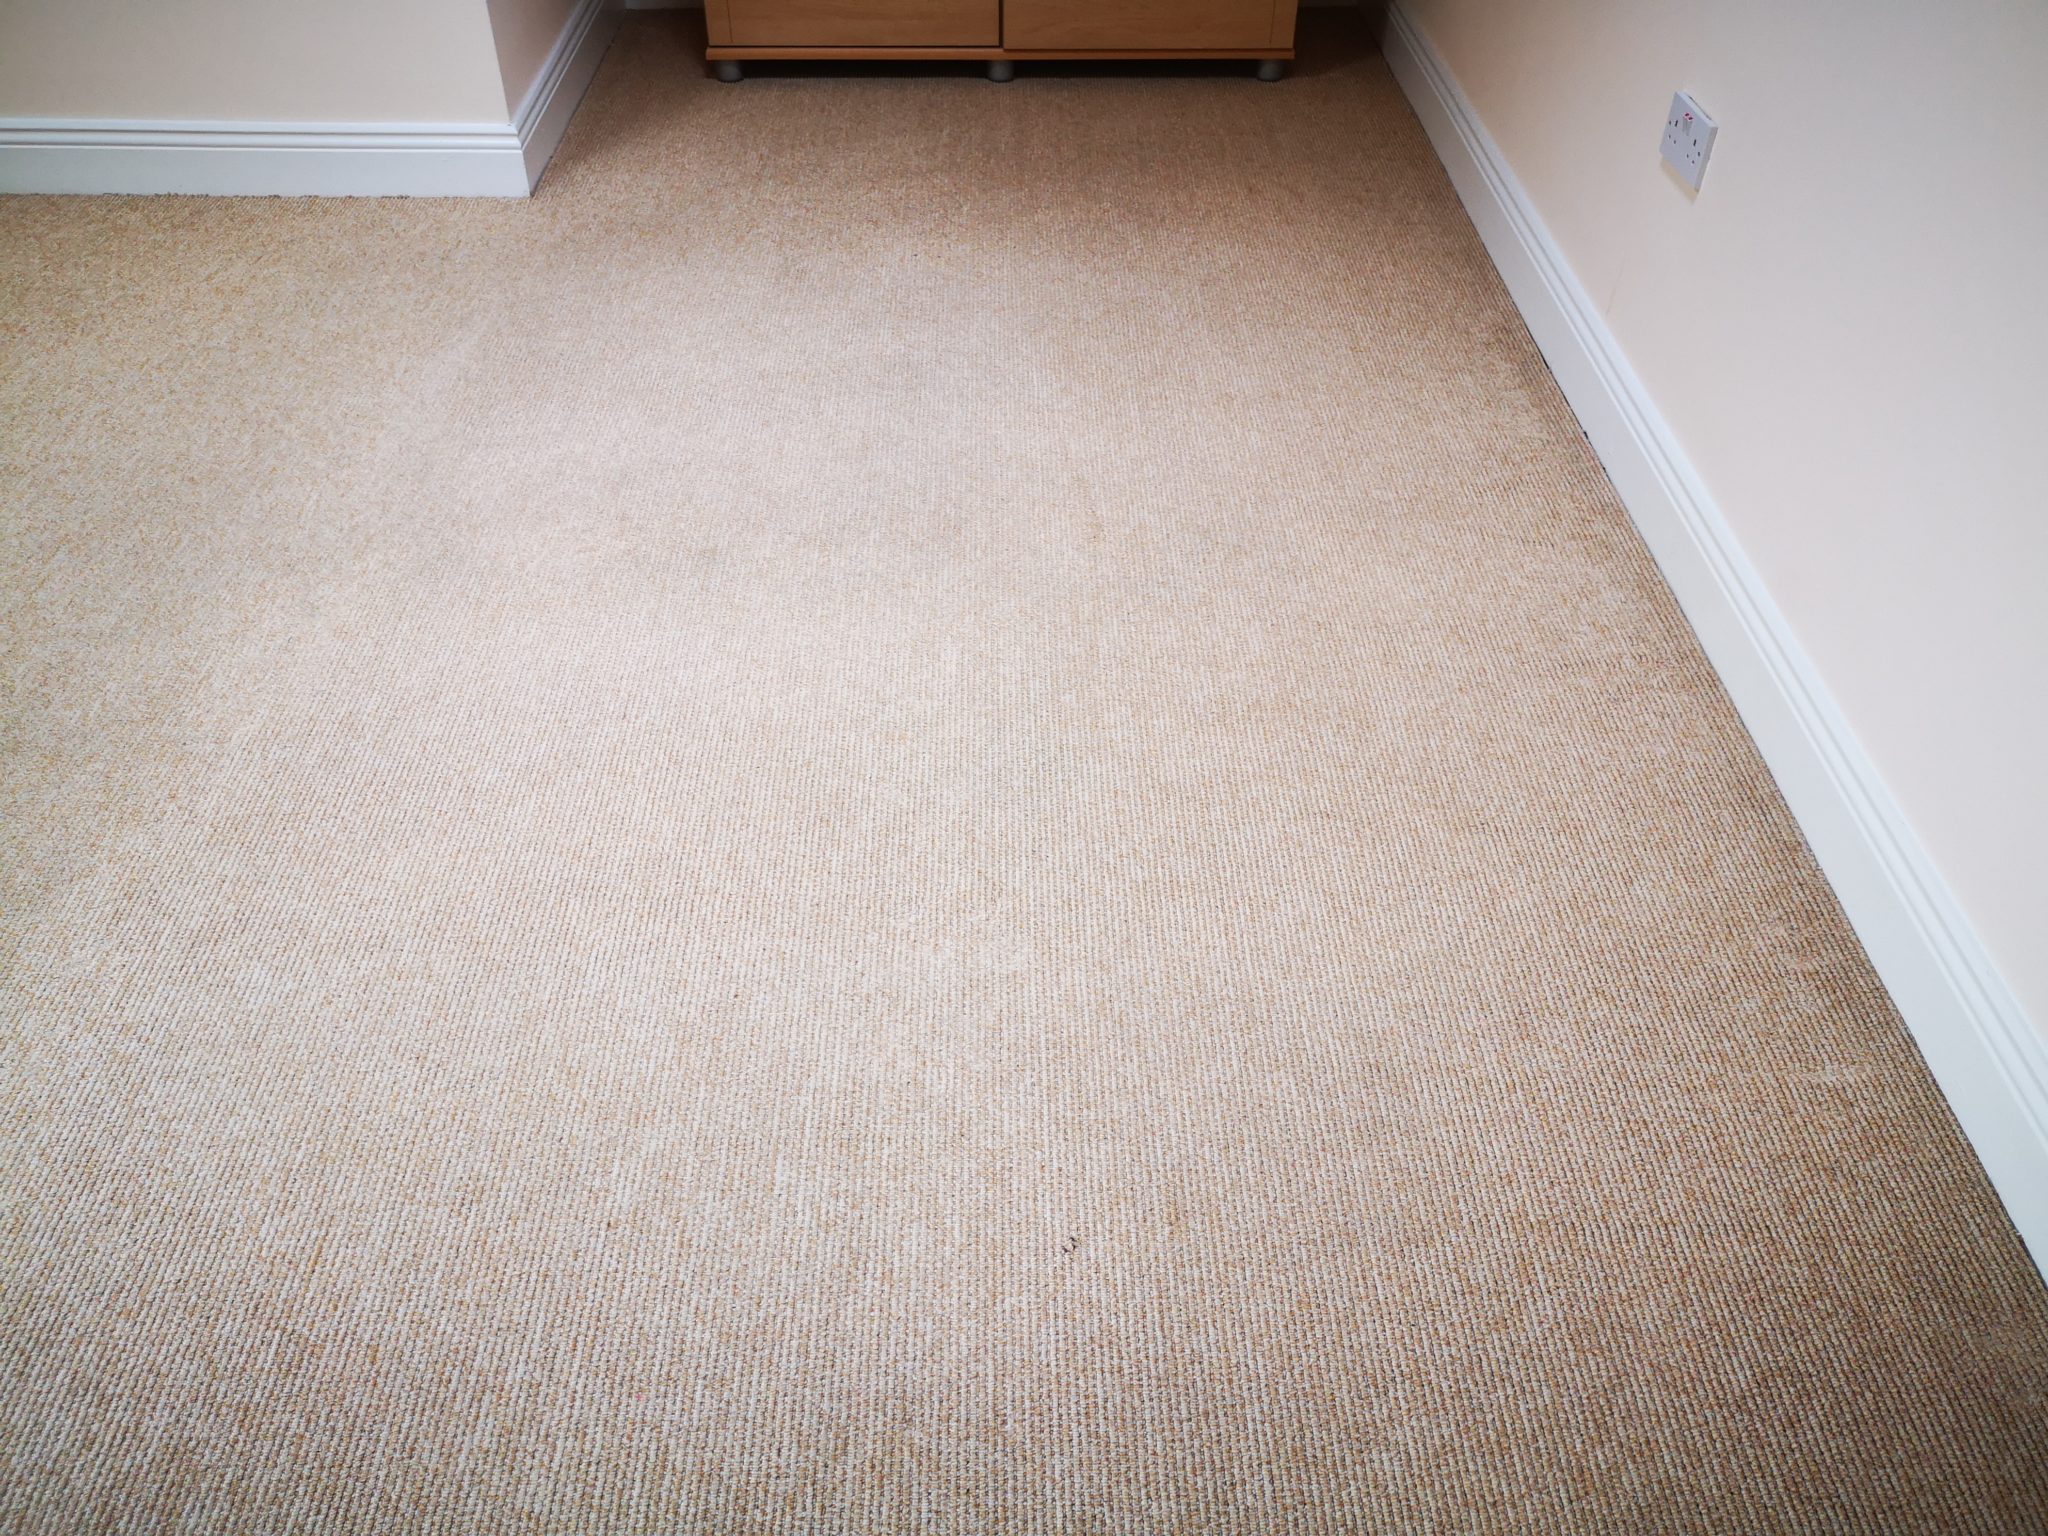 WestClean Professional Carpet Cleaning